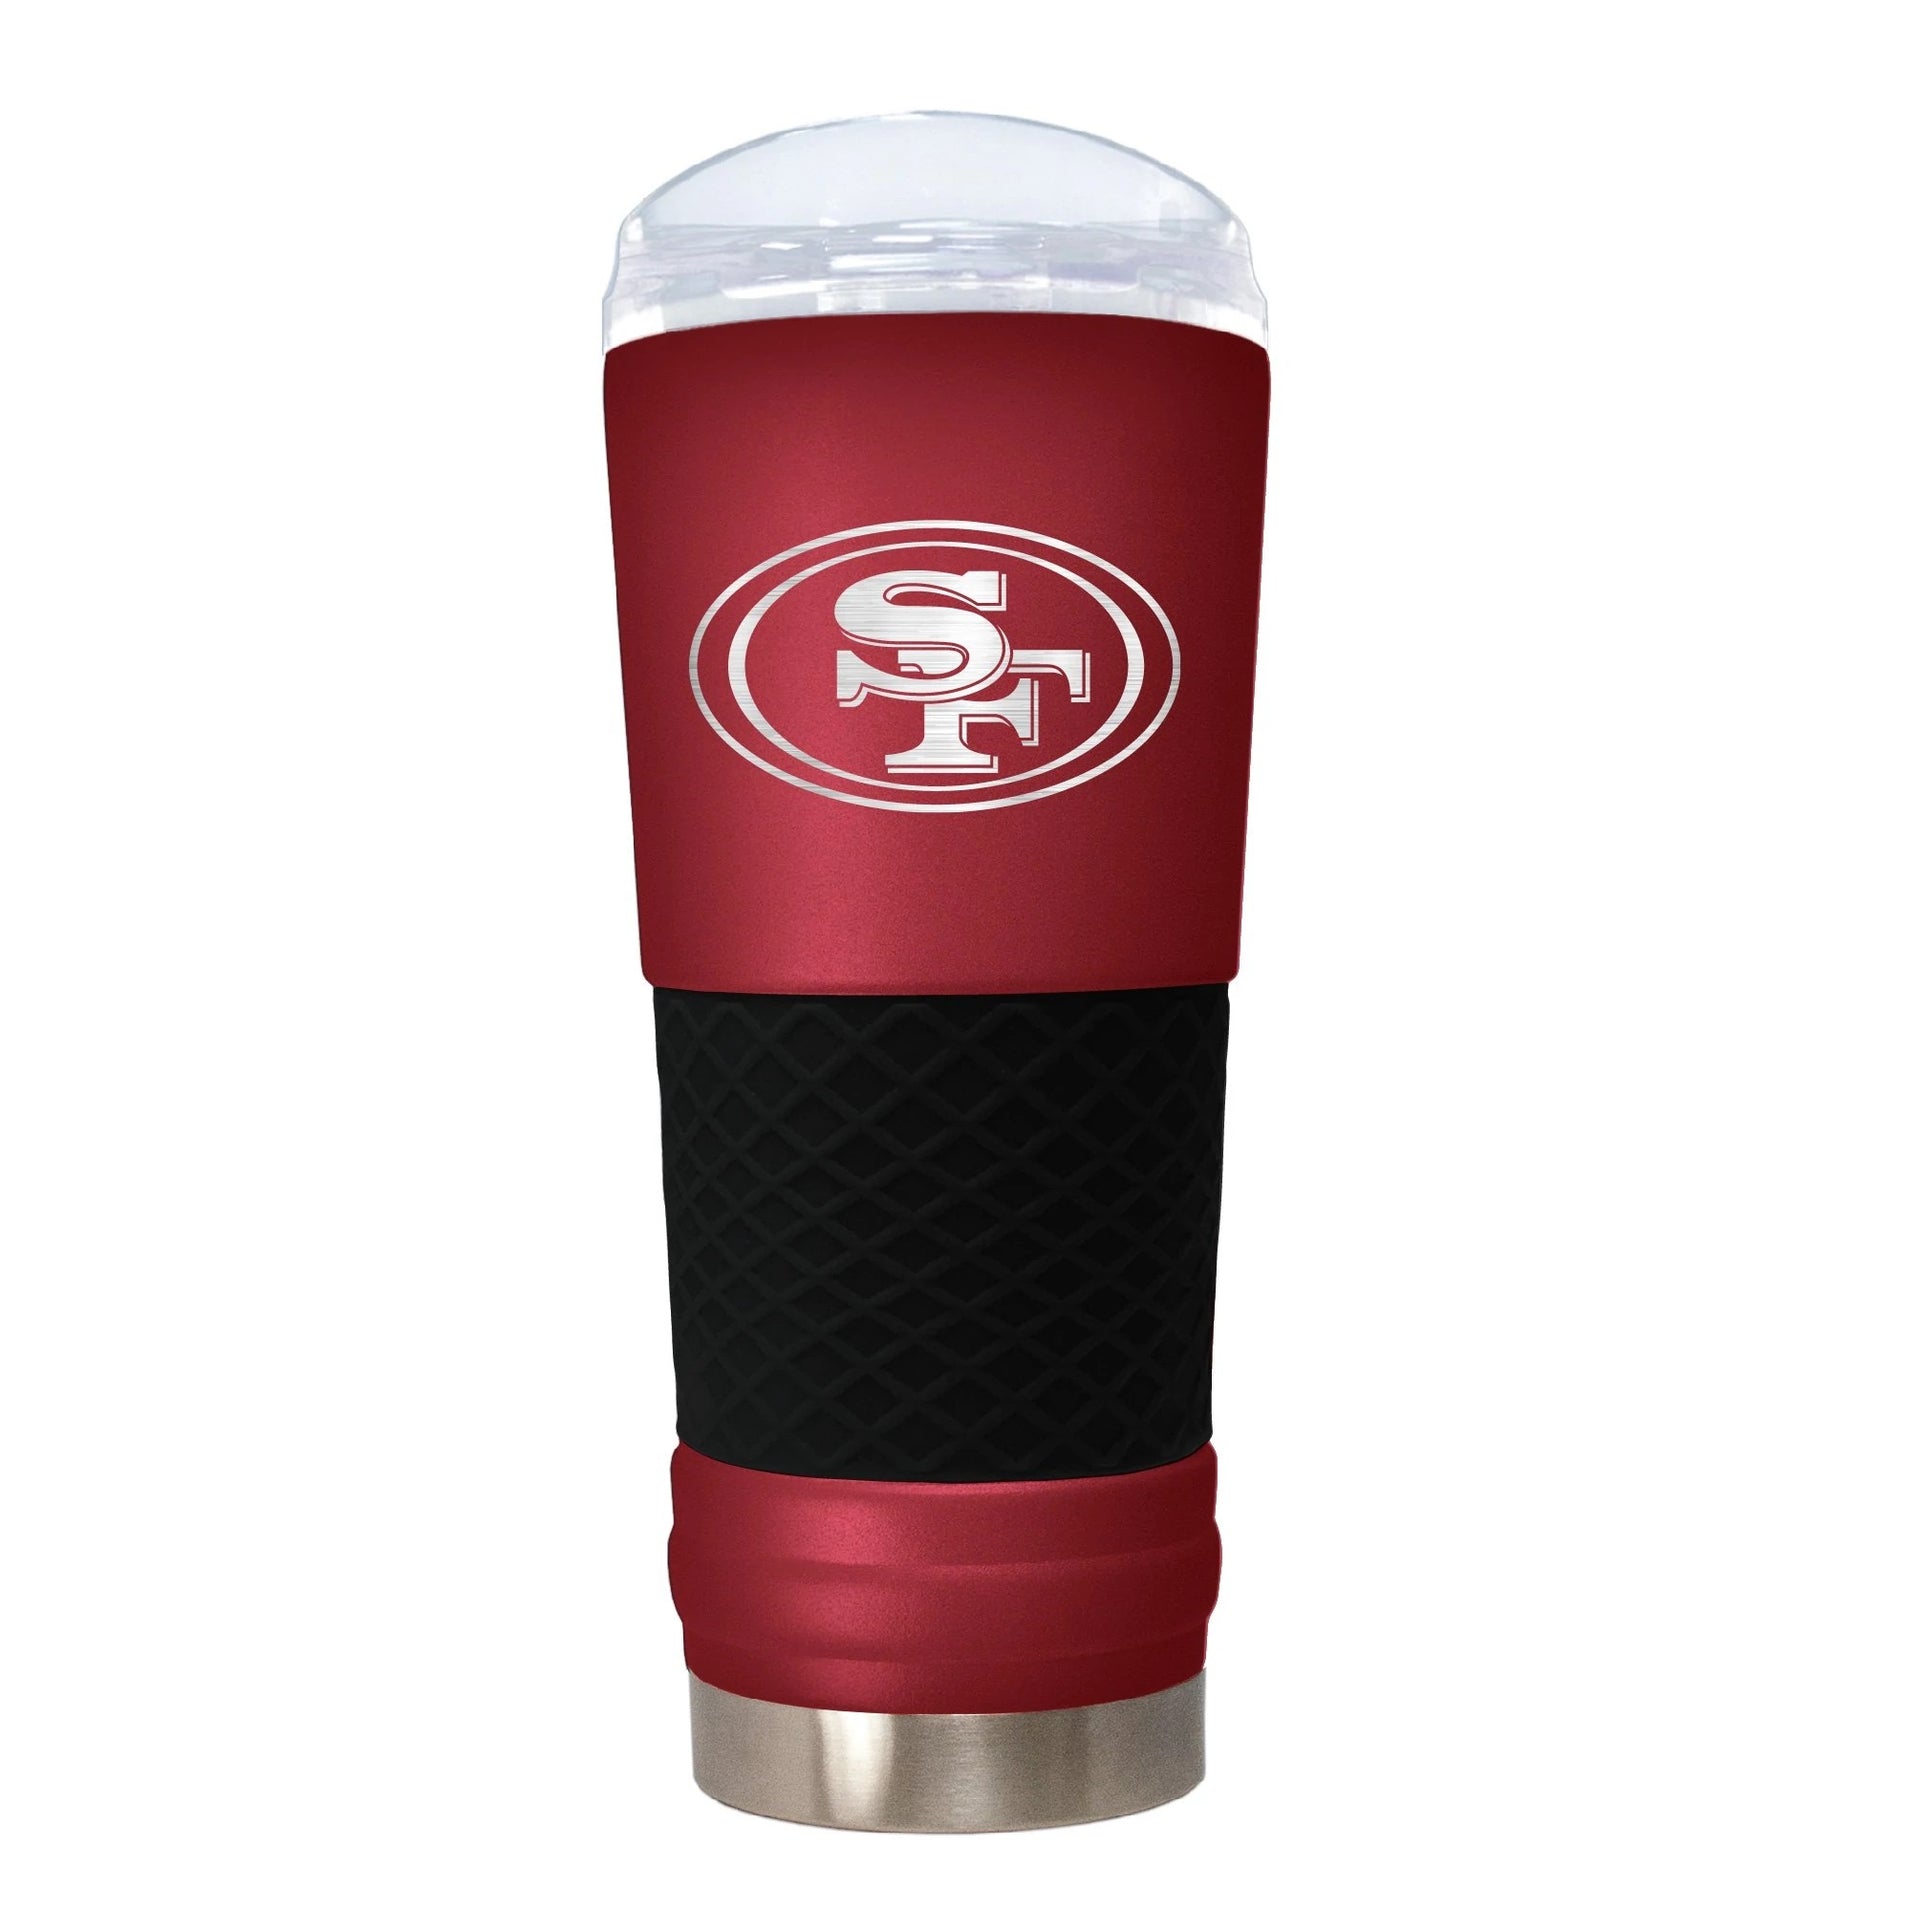 San Francisco 49ers "The Draft" 24 oz. Stainless Steel Travel Tumbler - Dynasty Sports & Framing 